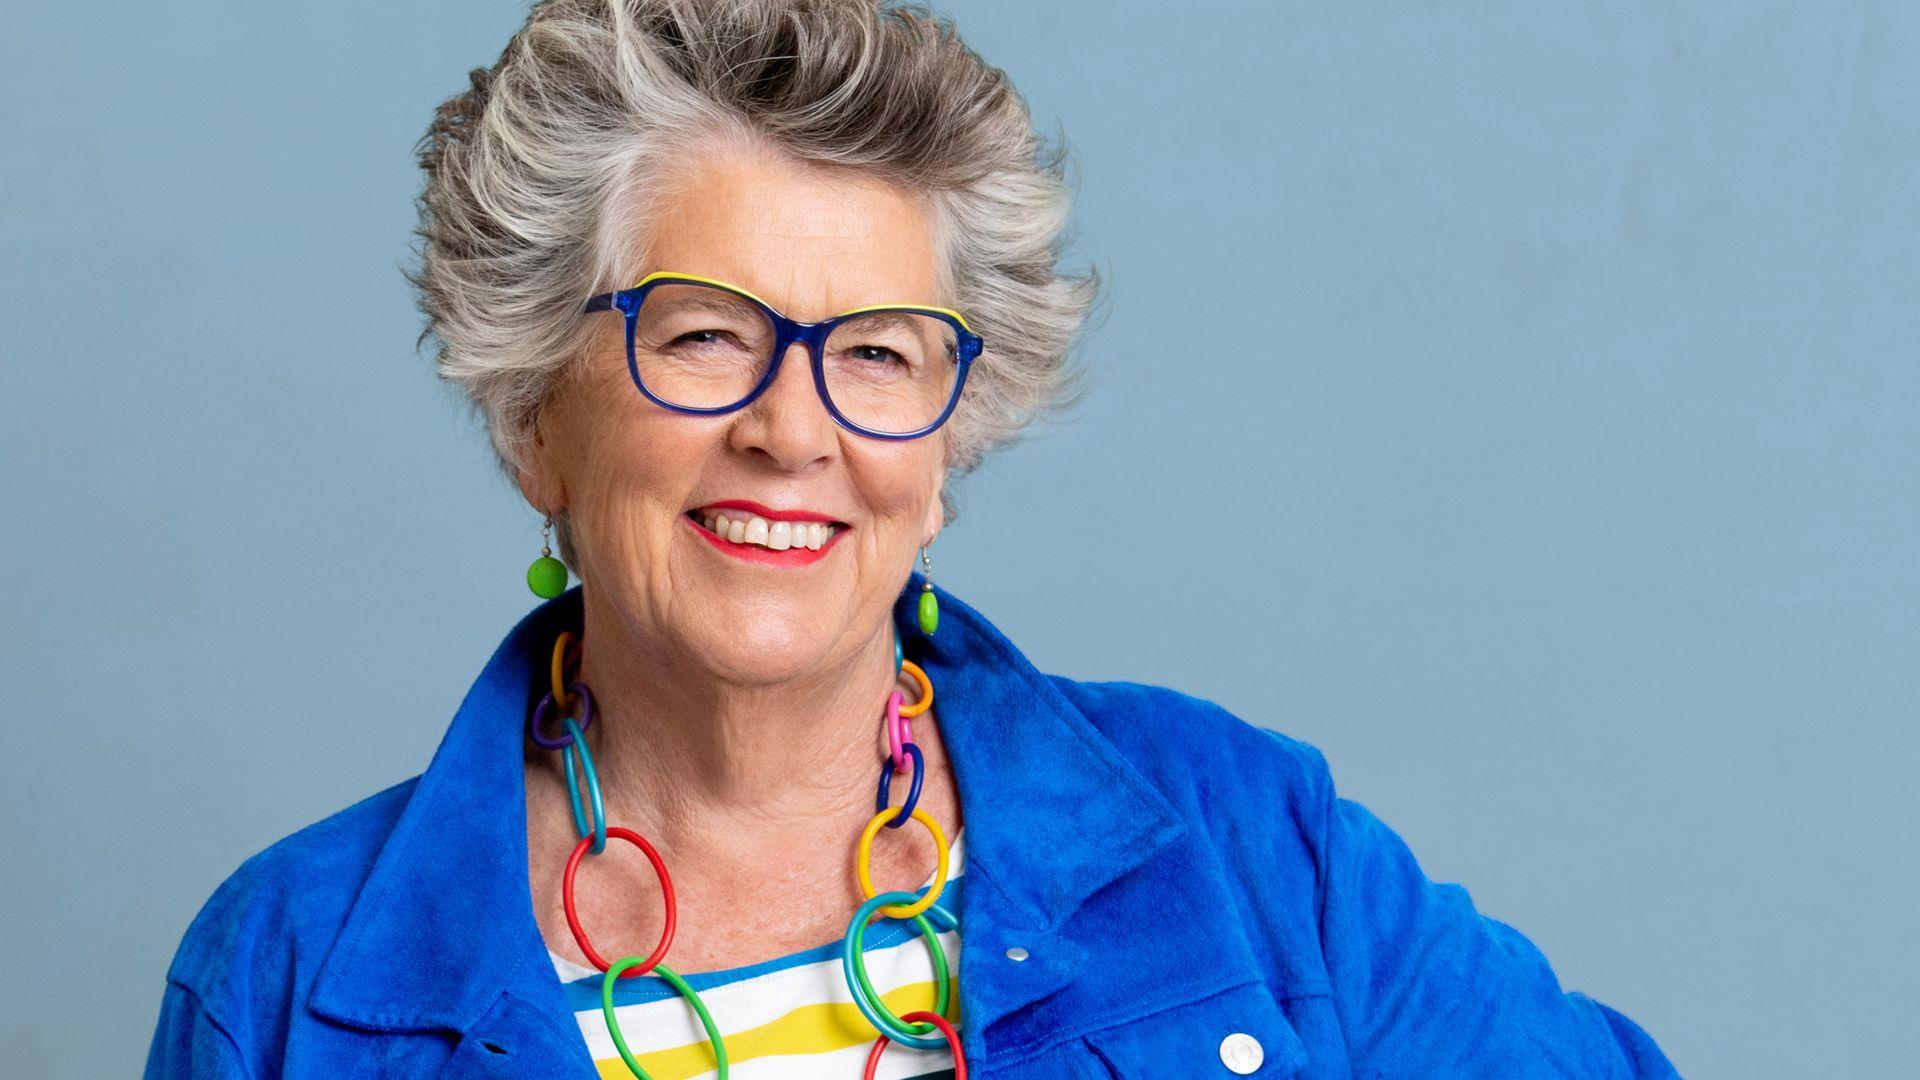 Prue Leith: Nothing in Moderation